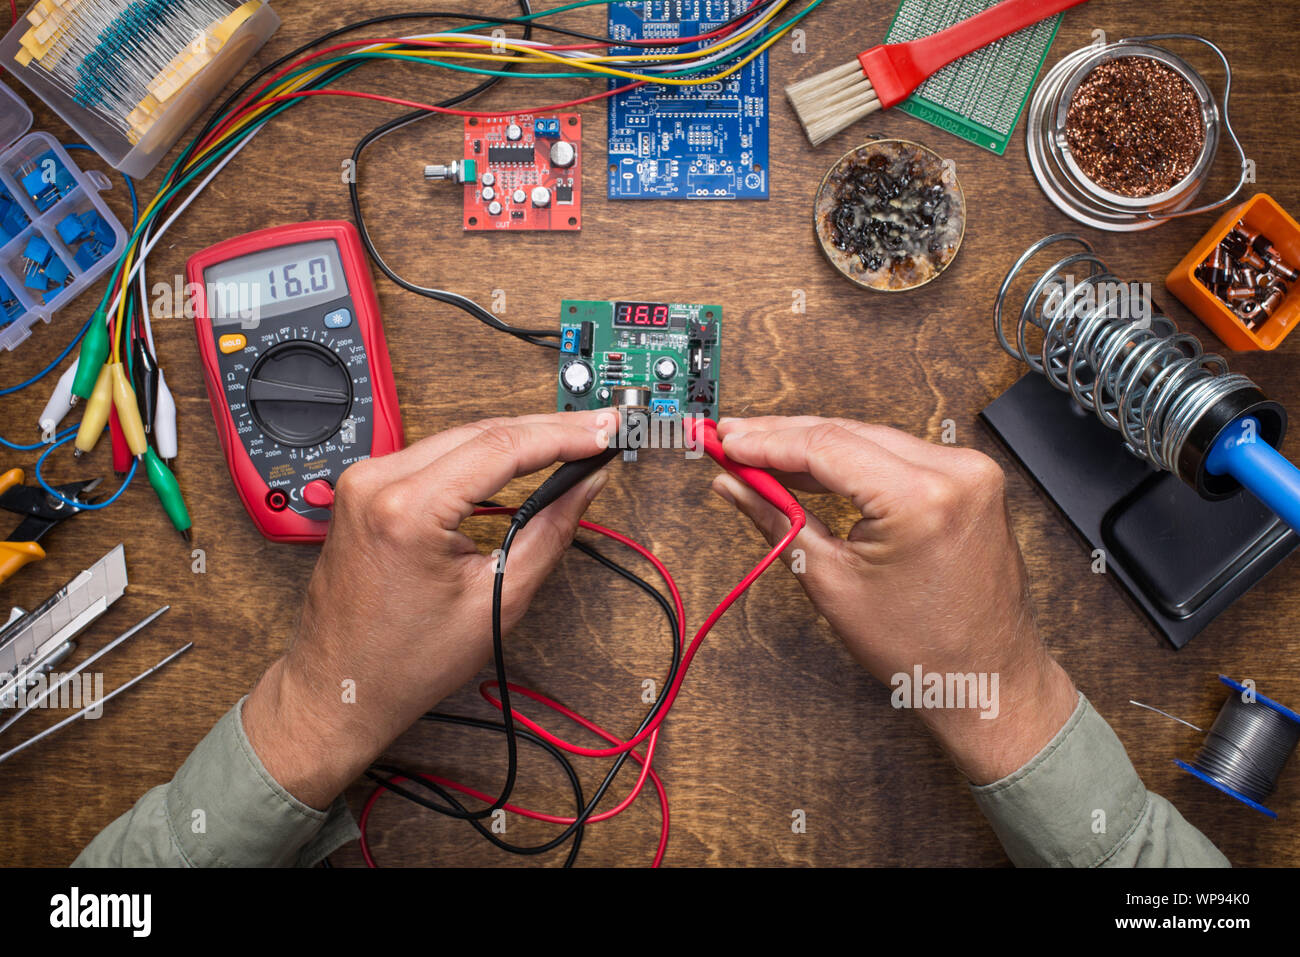 Hands measuring power supply voltage with tester. DIY, electronics, repair, making concept. Stock Photo